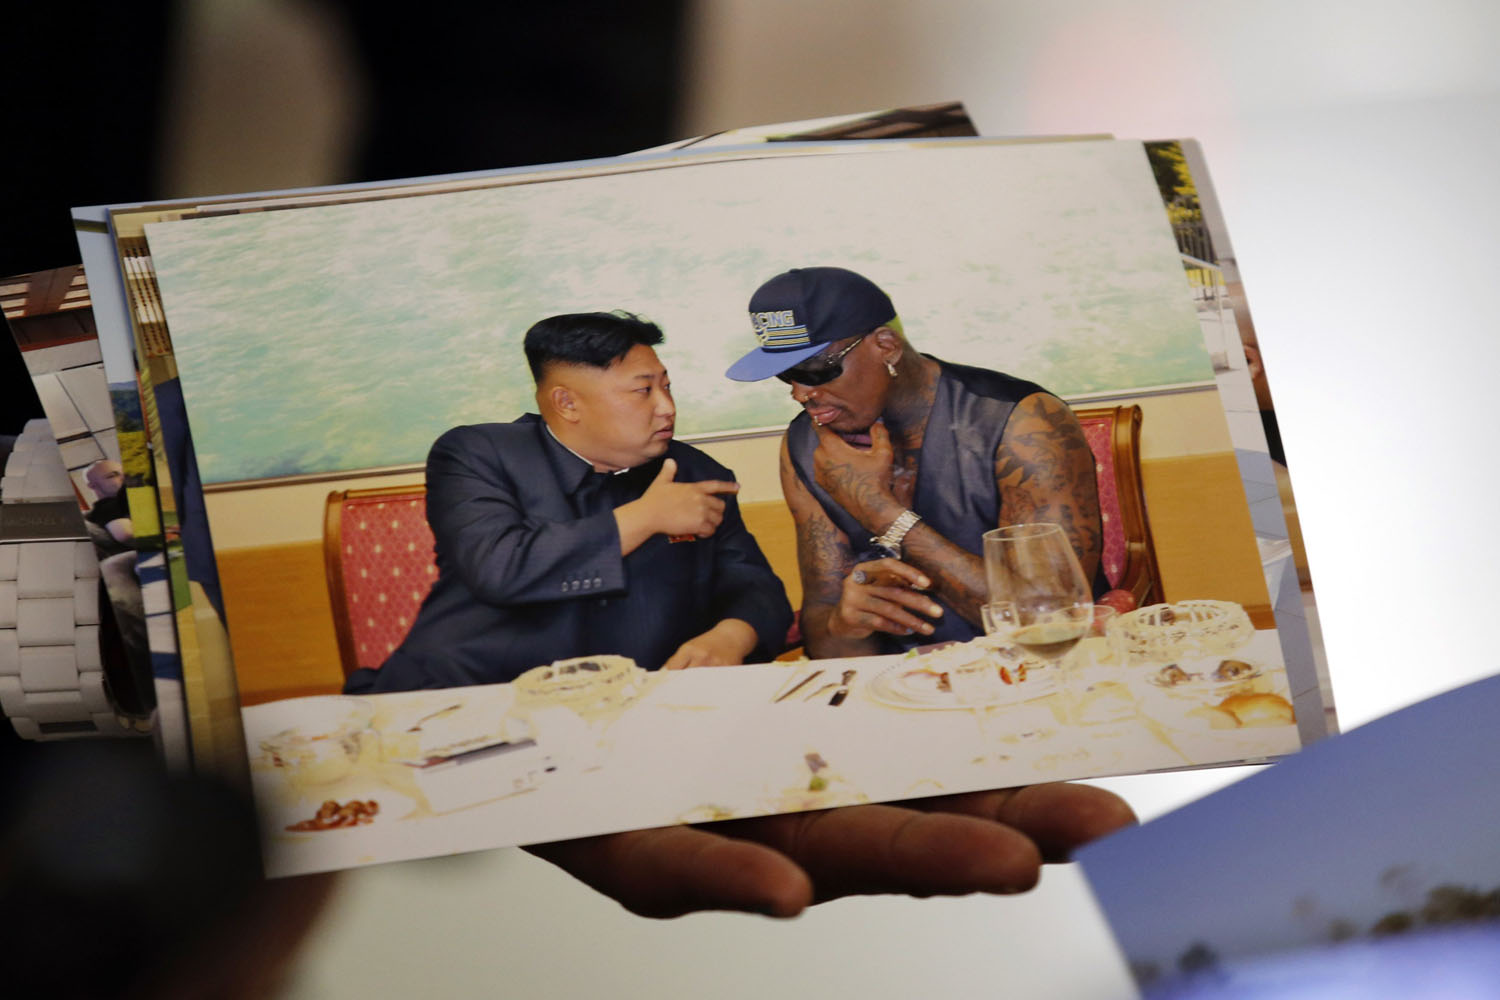 Former basketball star Rodman of the U.S. shows a picture which he took with North Korean leader Kim as he arrives at Beijing Capital International Airport